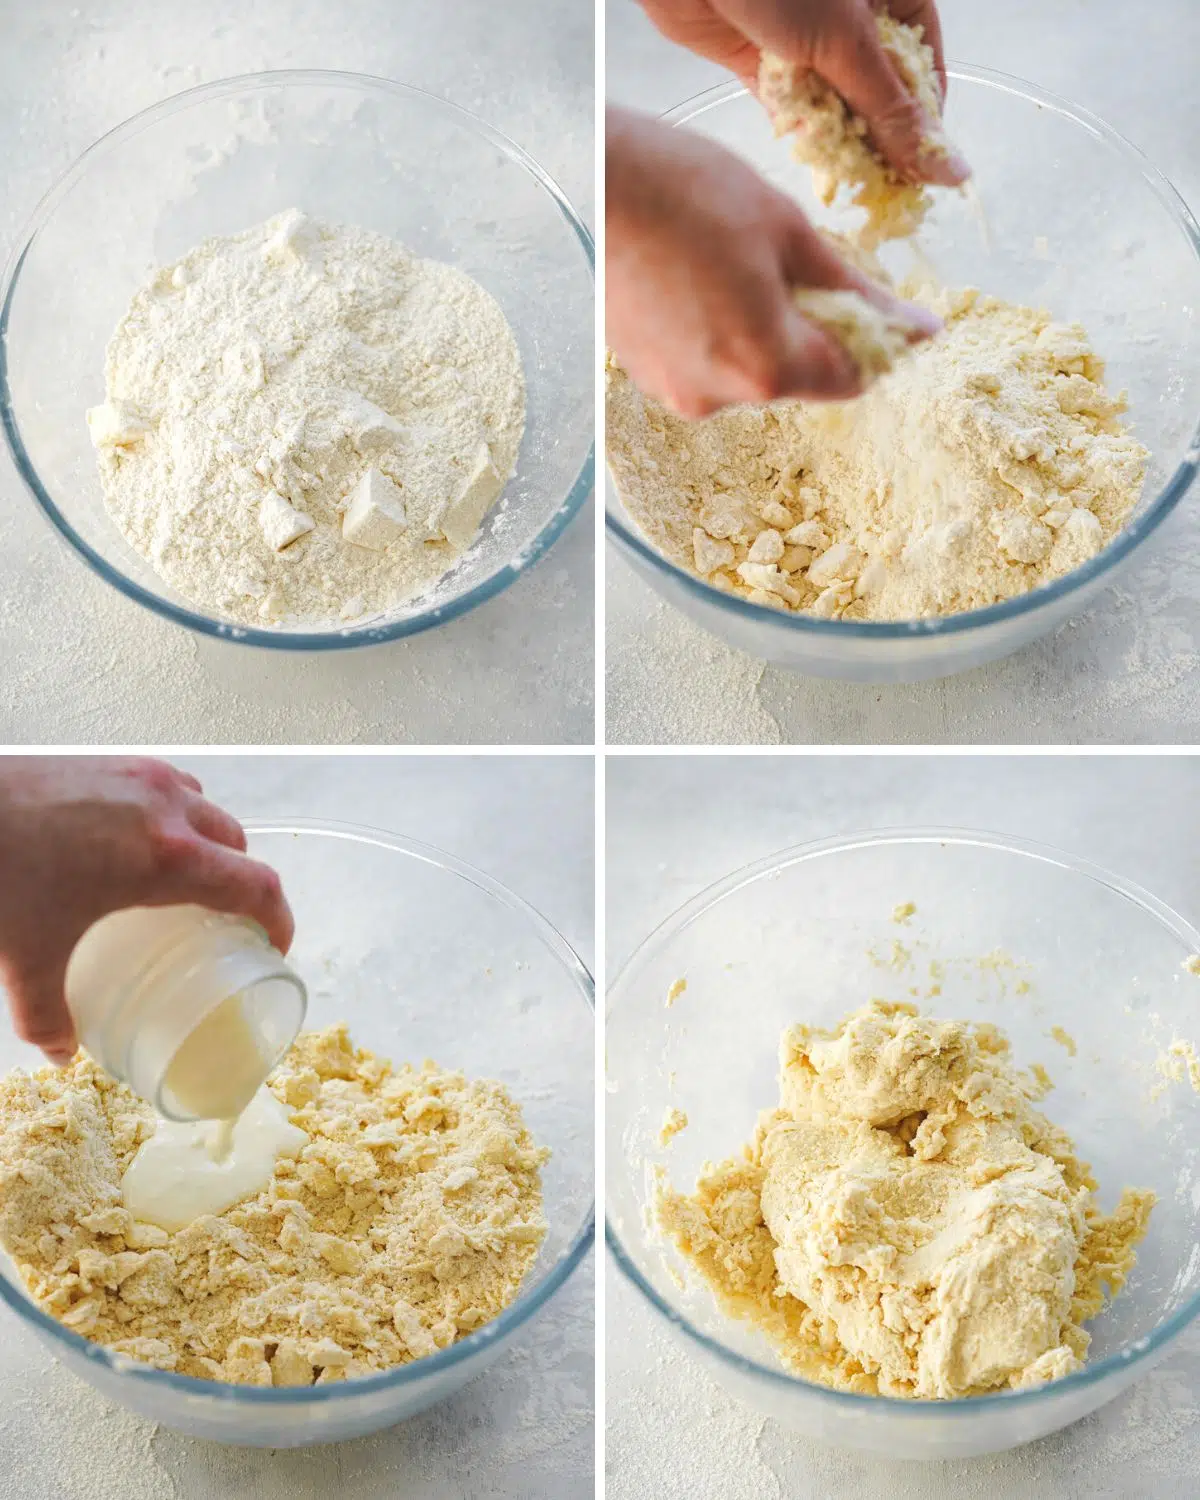 making pastry by rubbing the butter into the flour using hands.